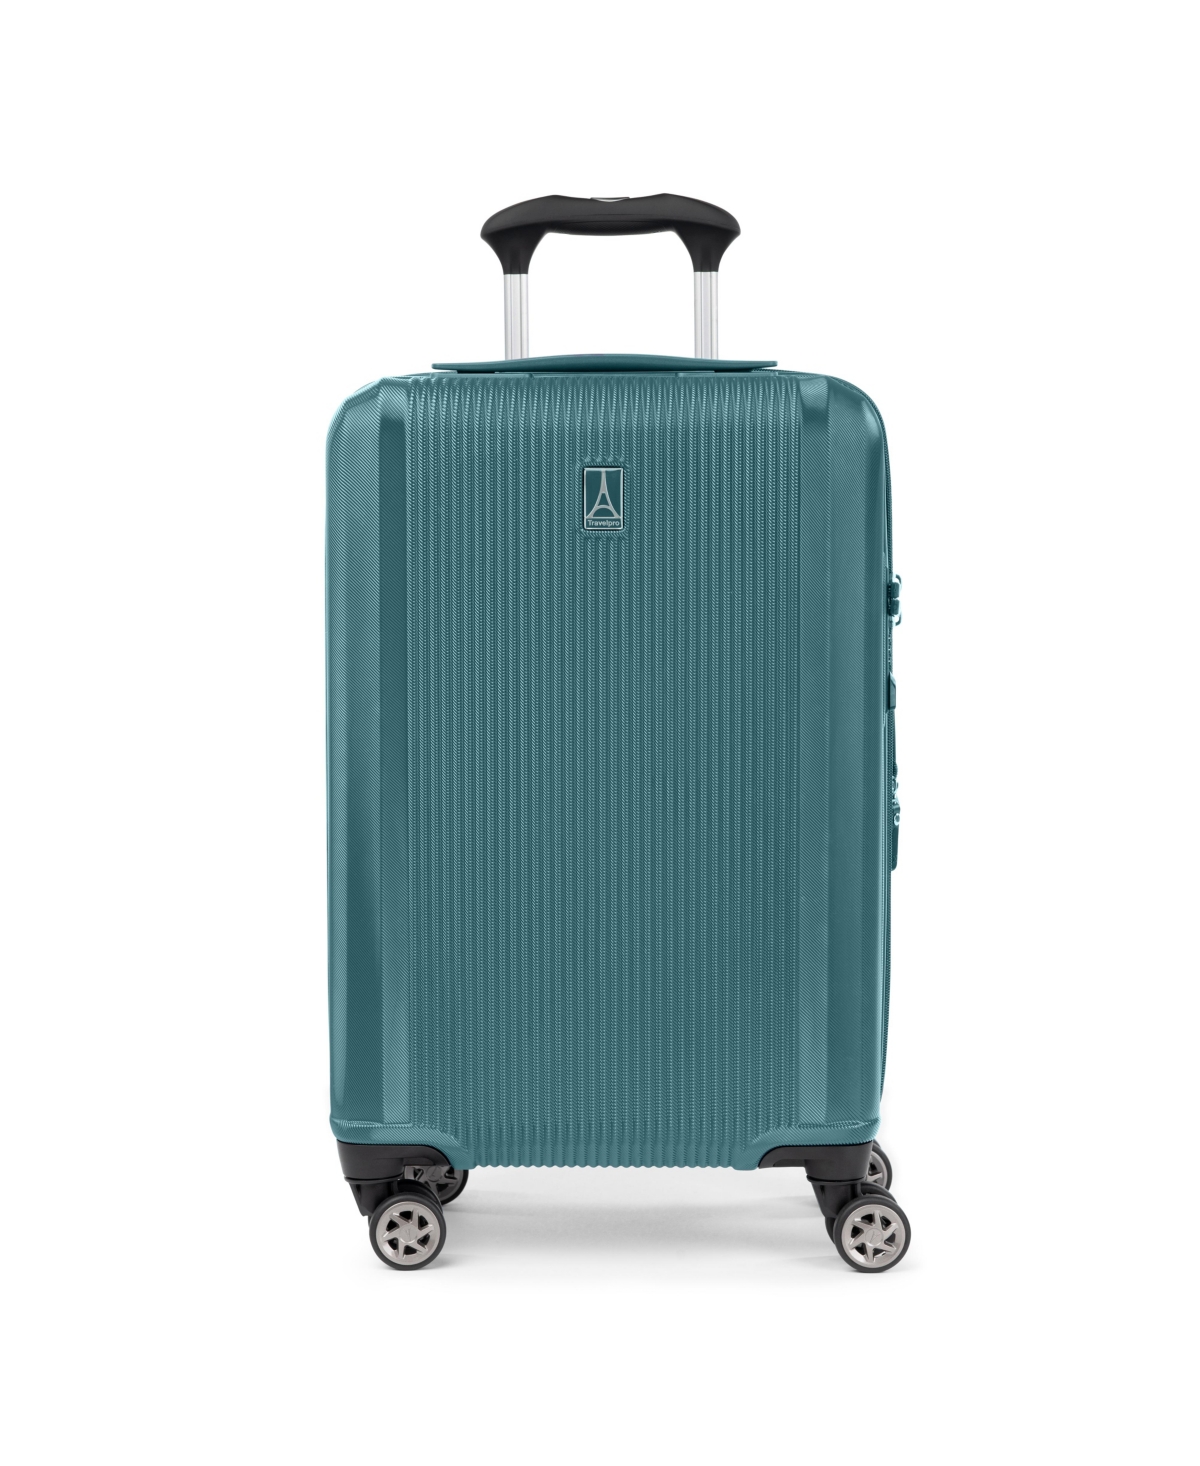 WalkAbout 6 Carry-on Expandable Hardside Spinner, Created for Macy's - Mediterranea